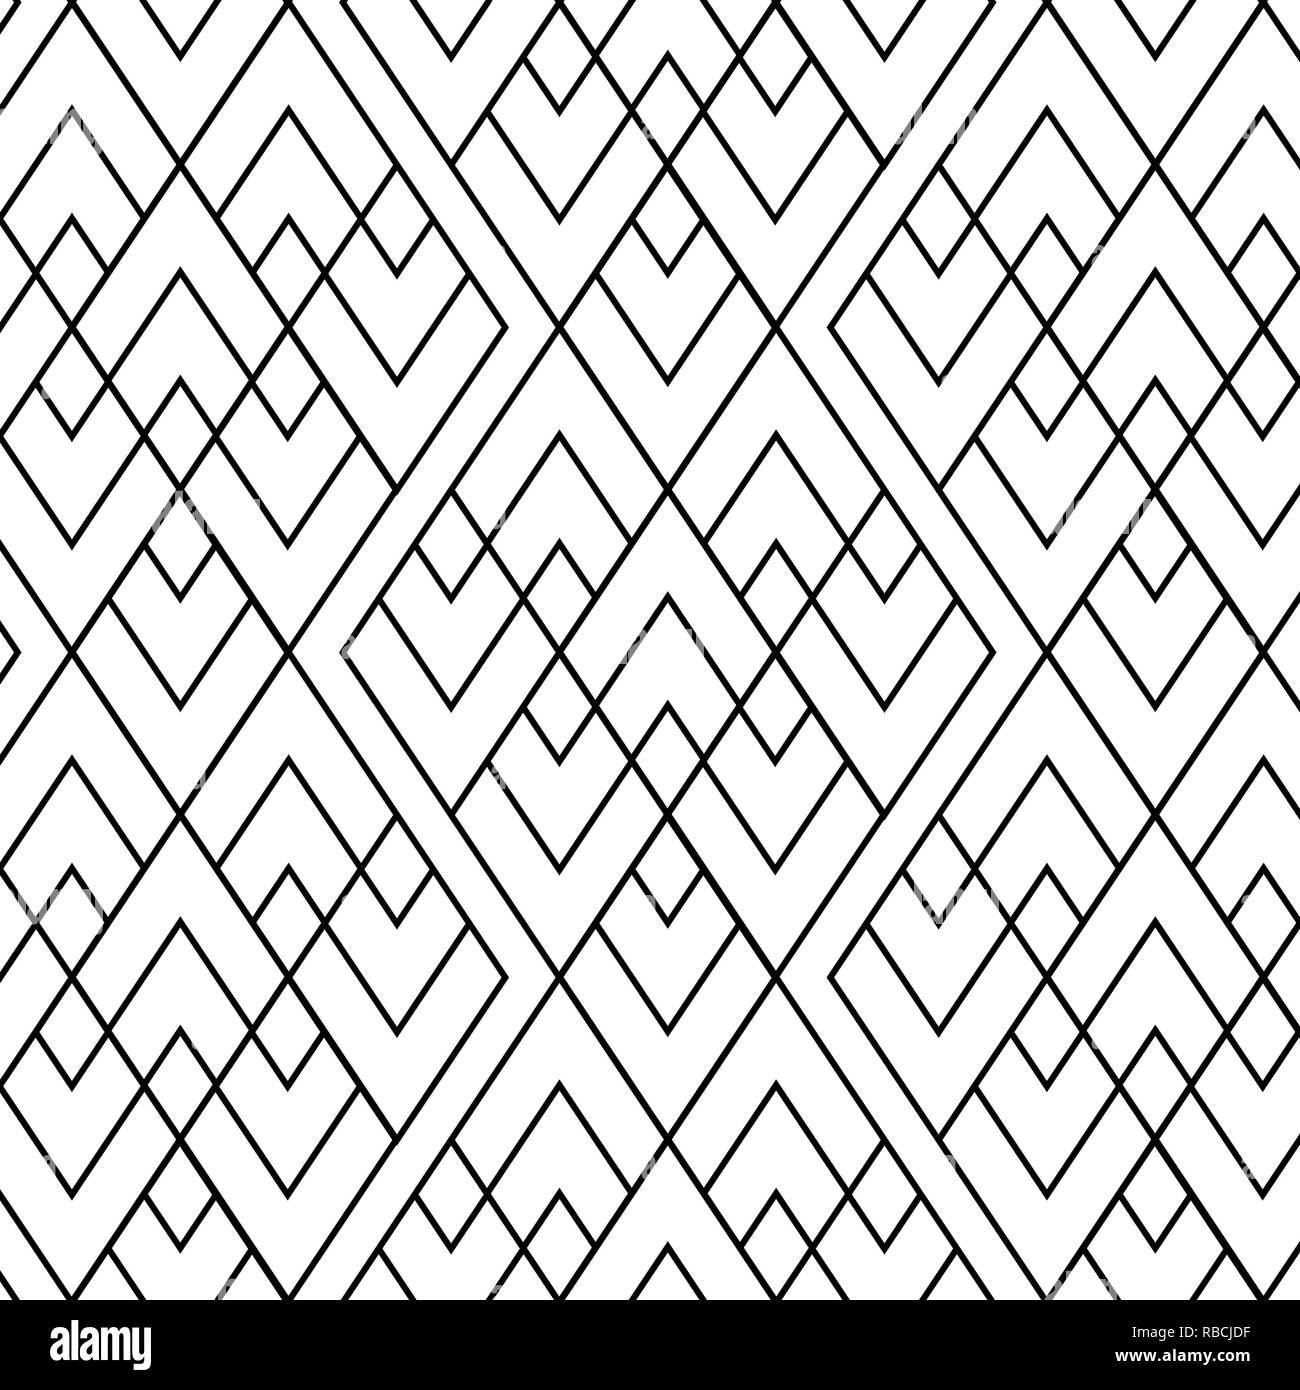 Seamless boho style pattern with outlined rhombus repeat. Stock Vector